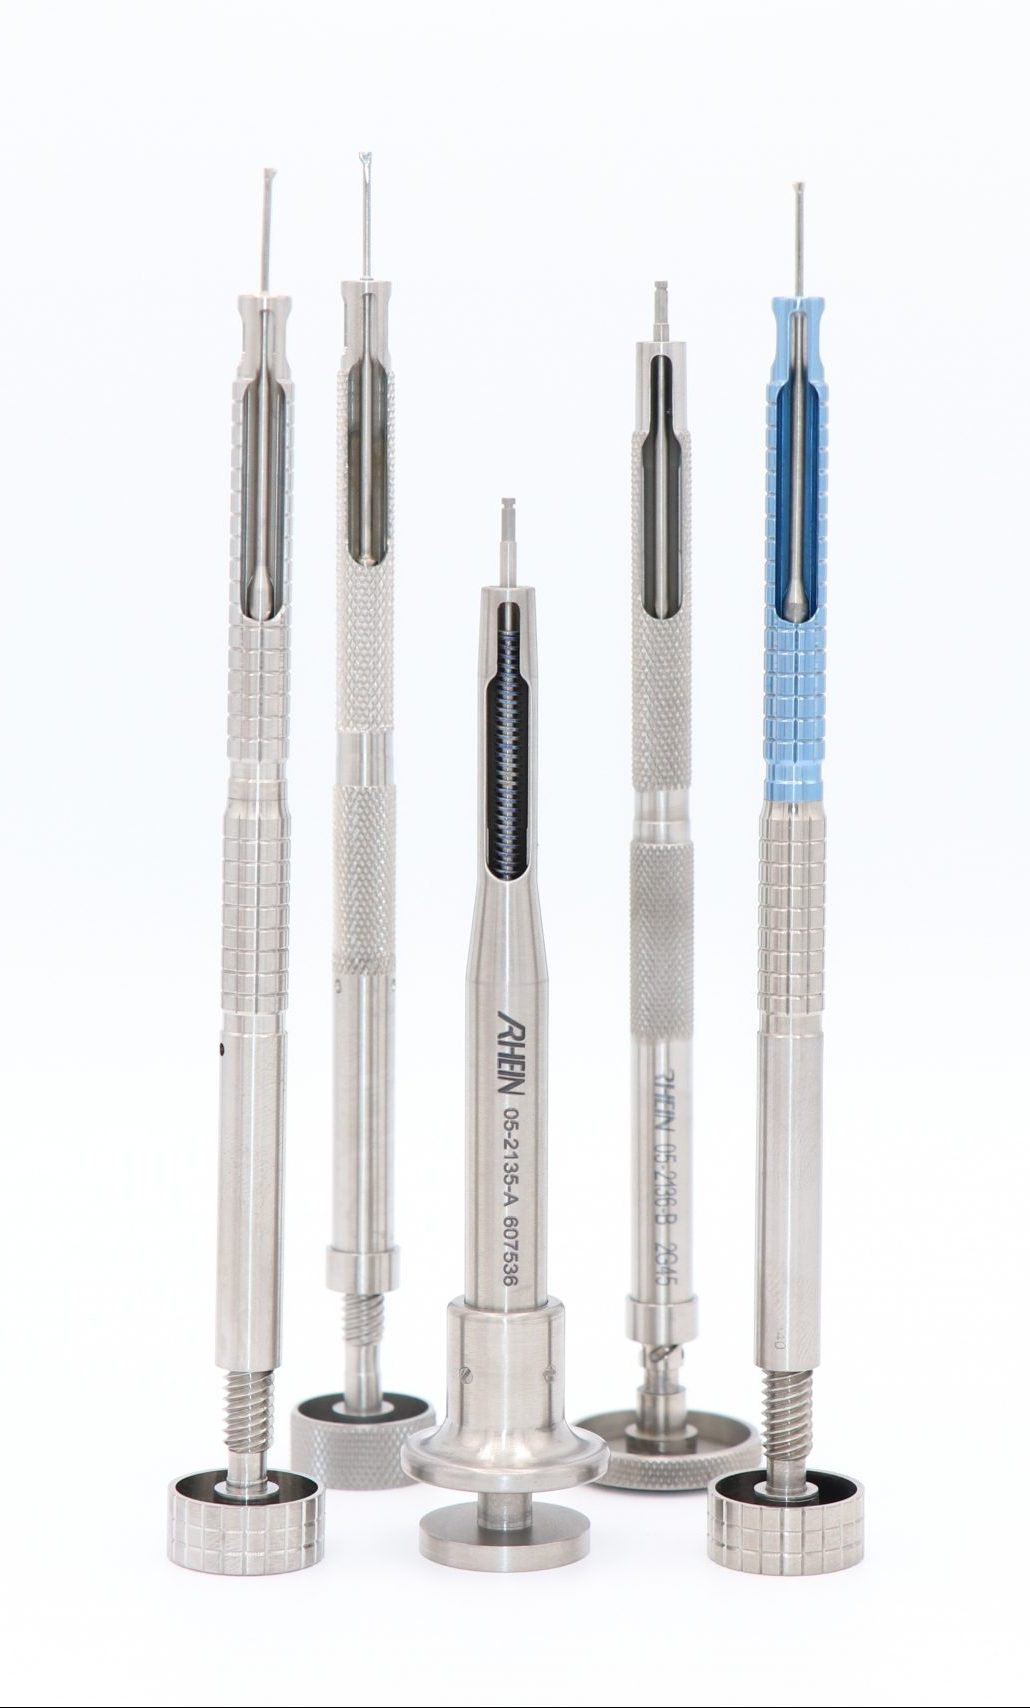 Rhein Precision Specializes in Medical Device & Surgical Instrumentation